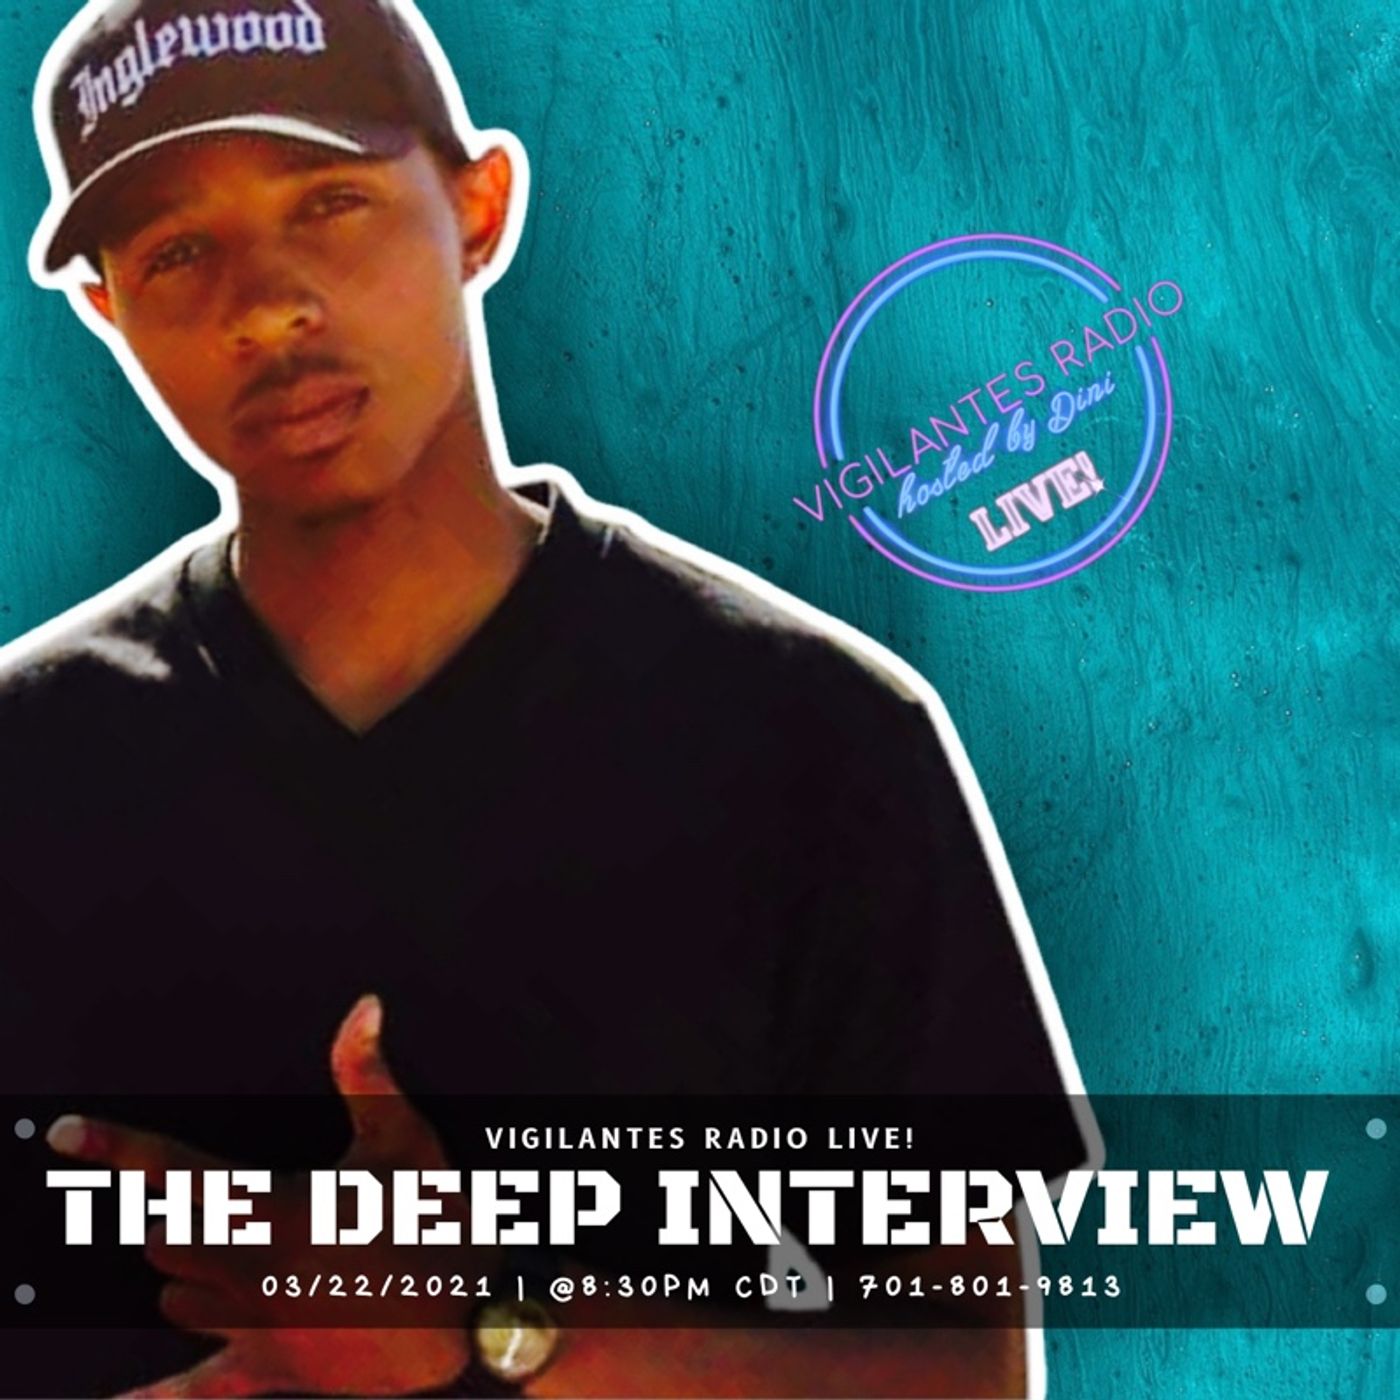 The Deep Interview. Image